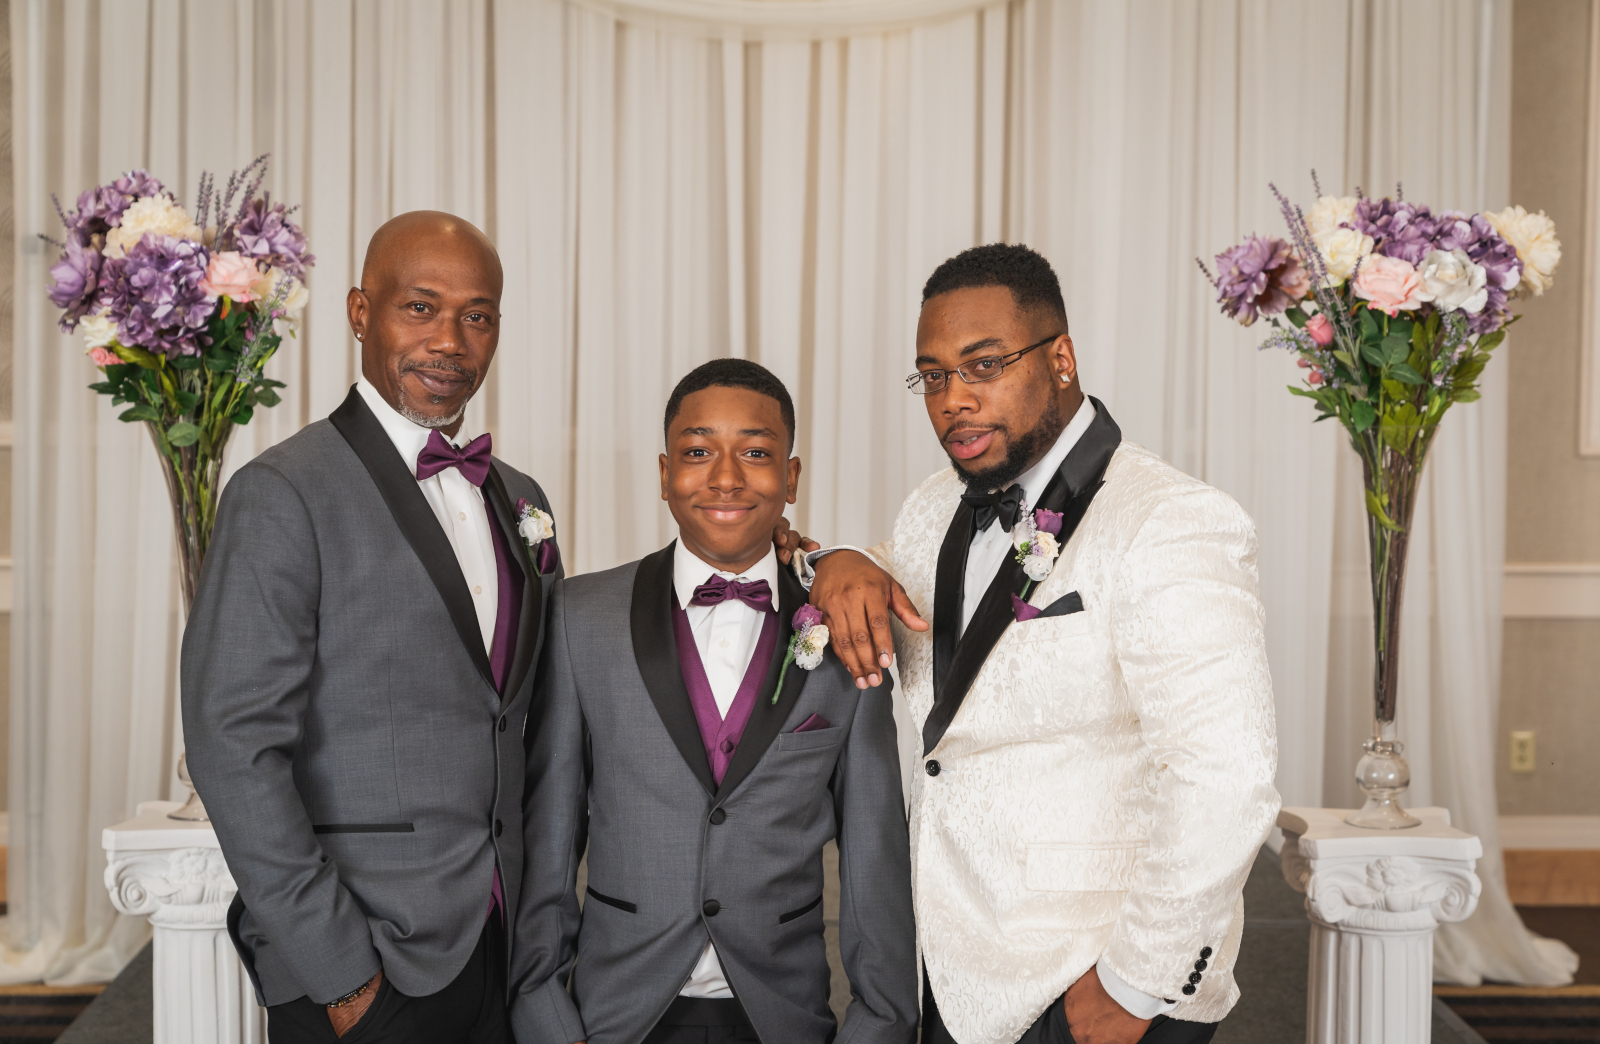 Groom with groomsmen, bridal party portrait, African American wedding, romantic wedding ceremony at Hilton Akron/Fairlawn